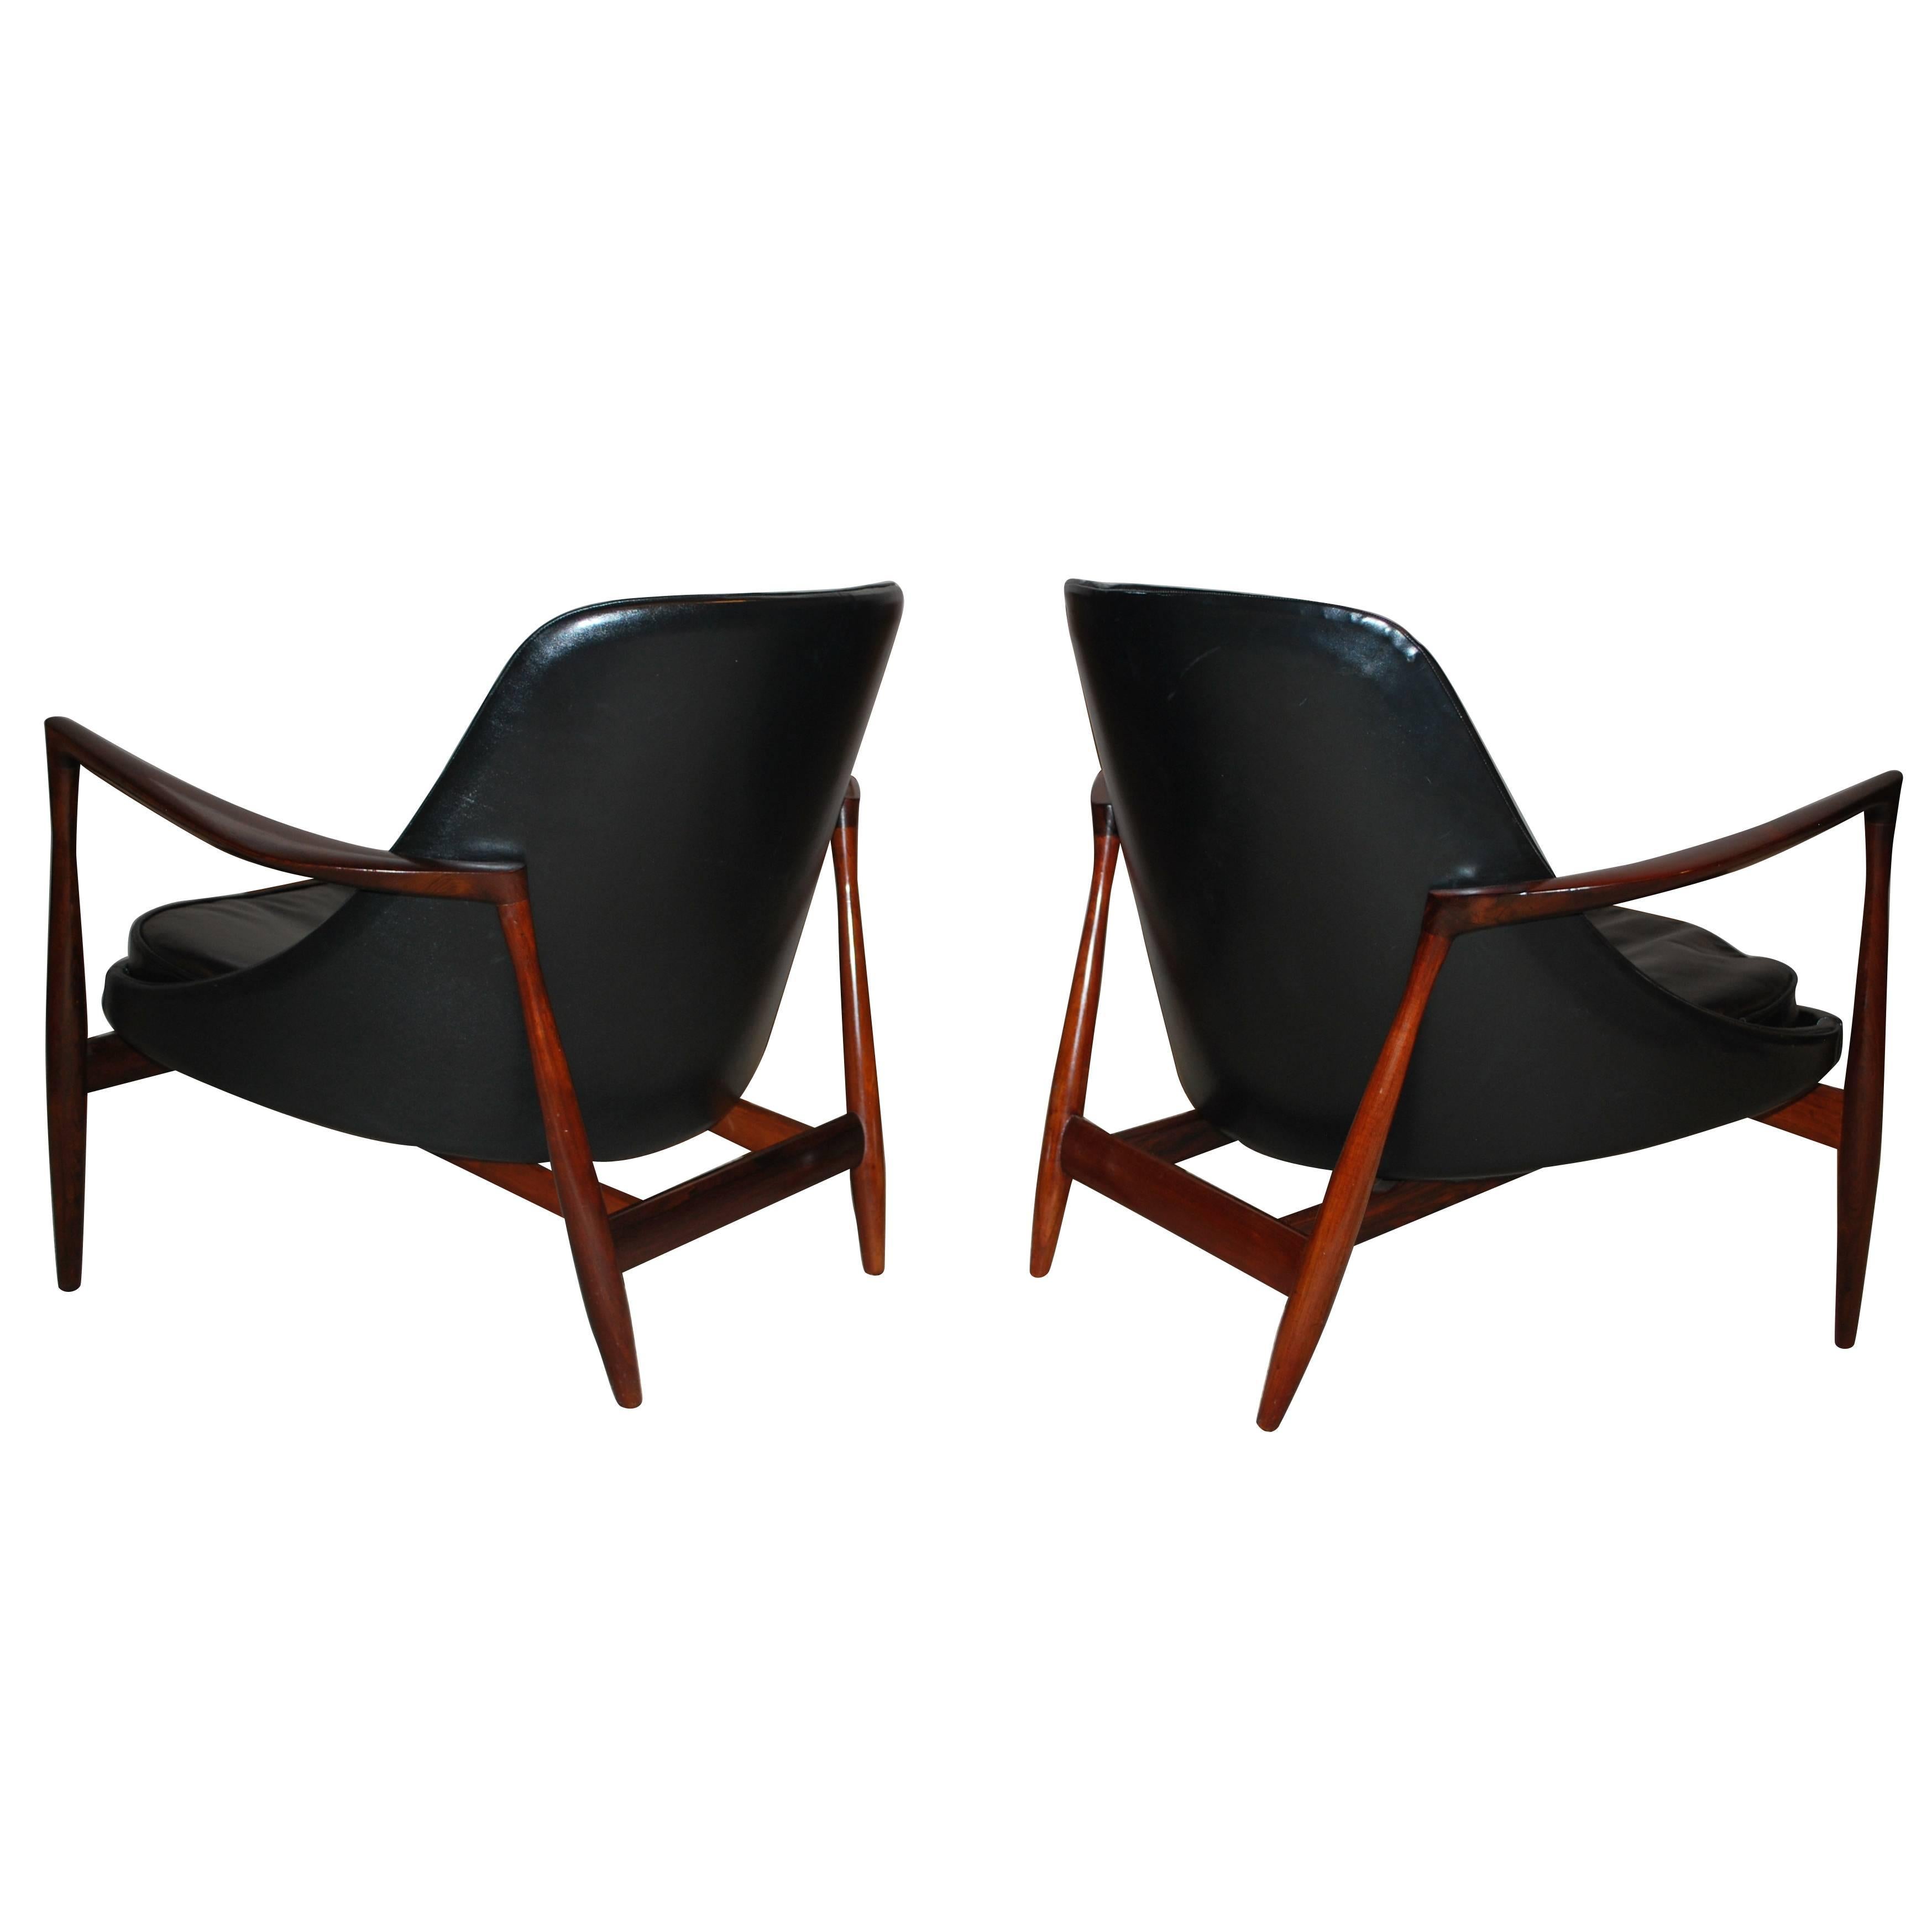 Pair of "Elizabeth" Chairs and Stool in Rosewood by Ib Kofod Larsen